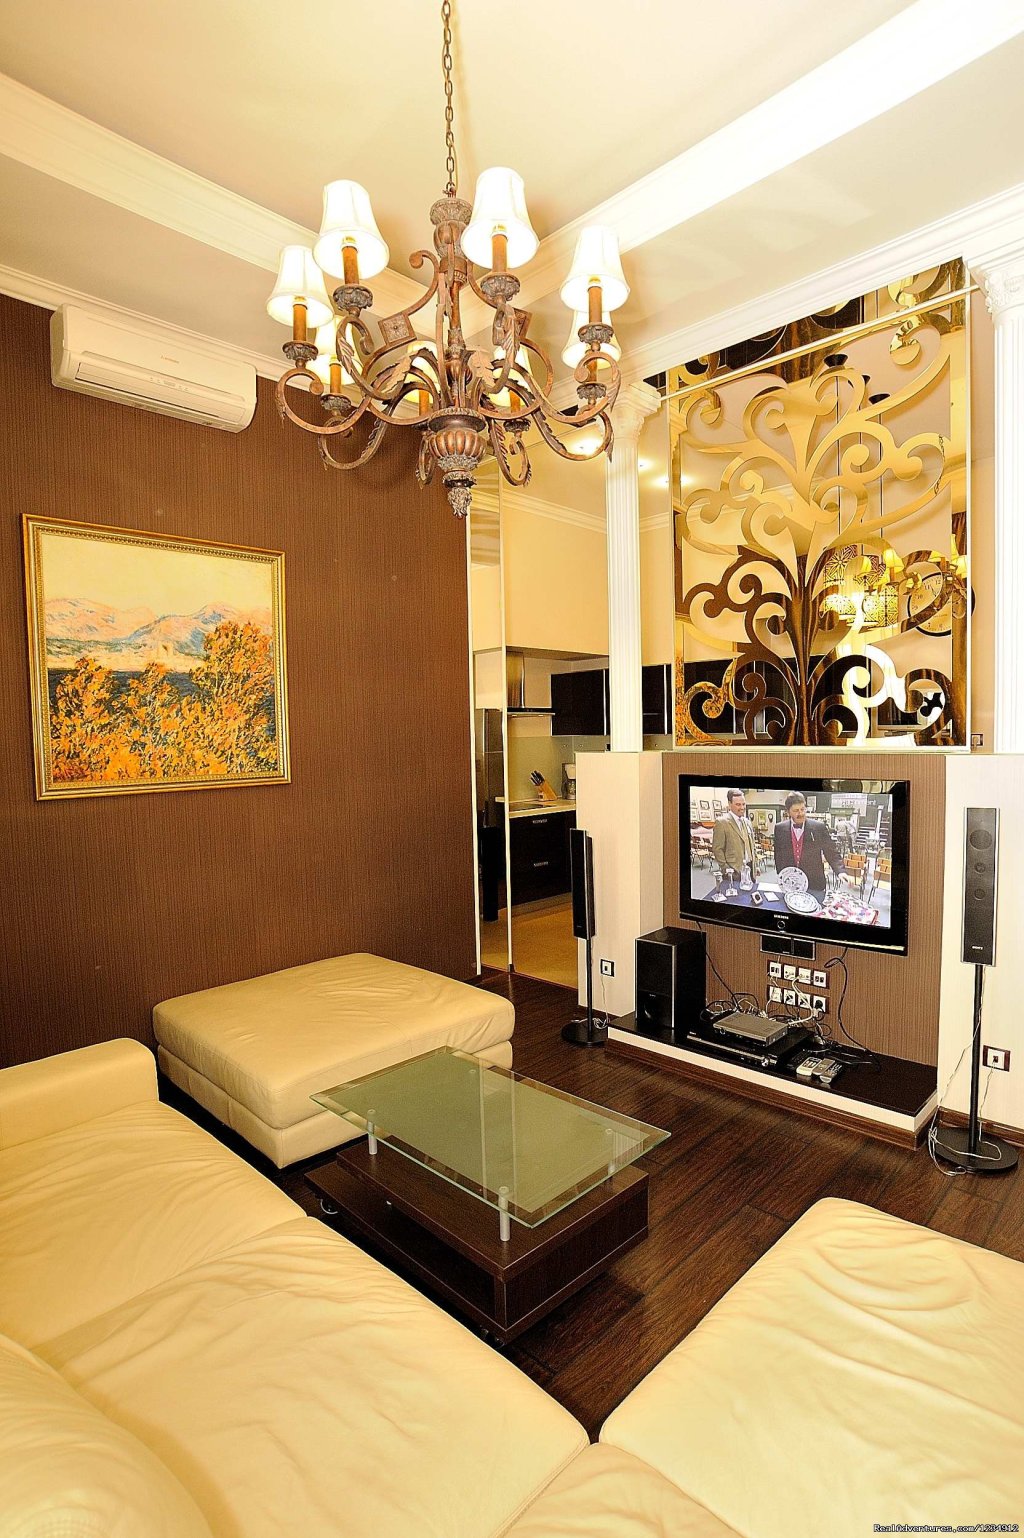 VIP 3room/2 bedroom apartment in the heart of Kiev | Image #17/24 | 